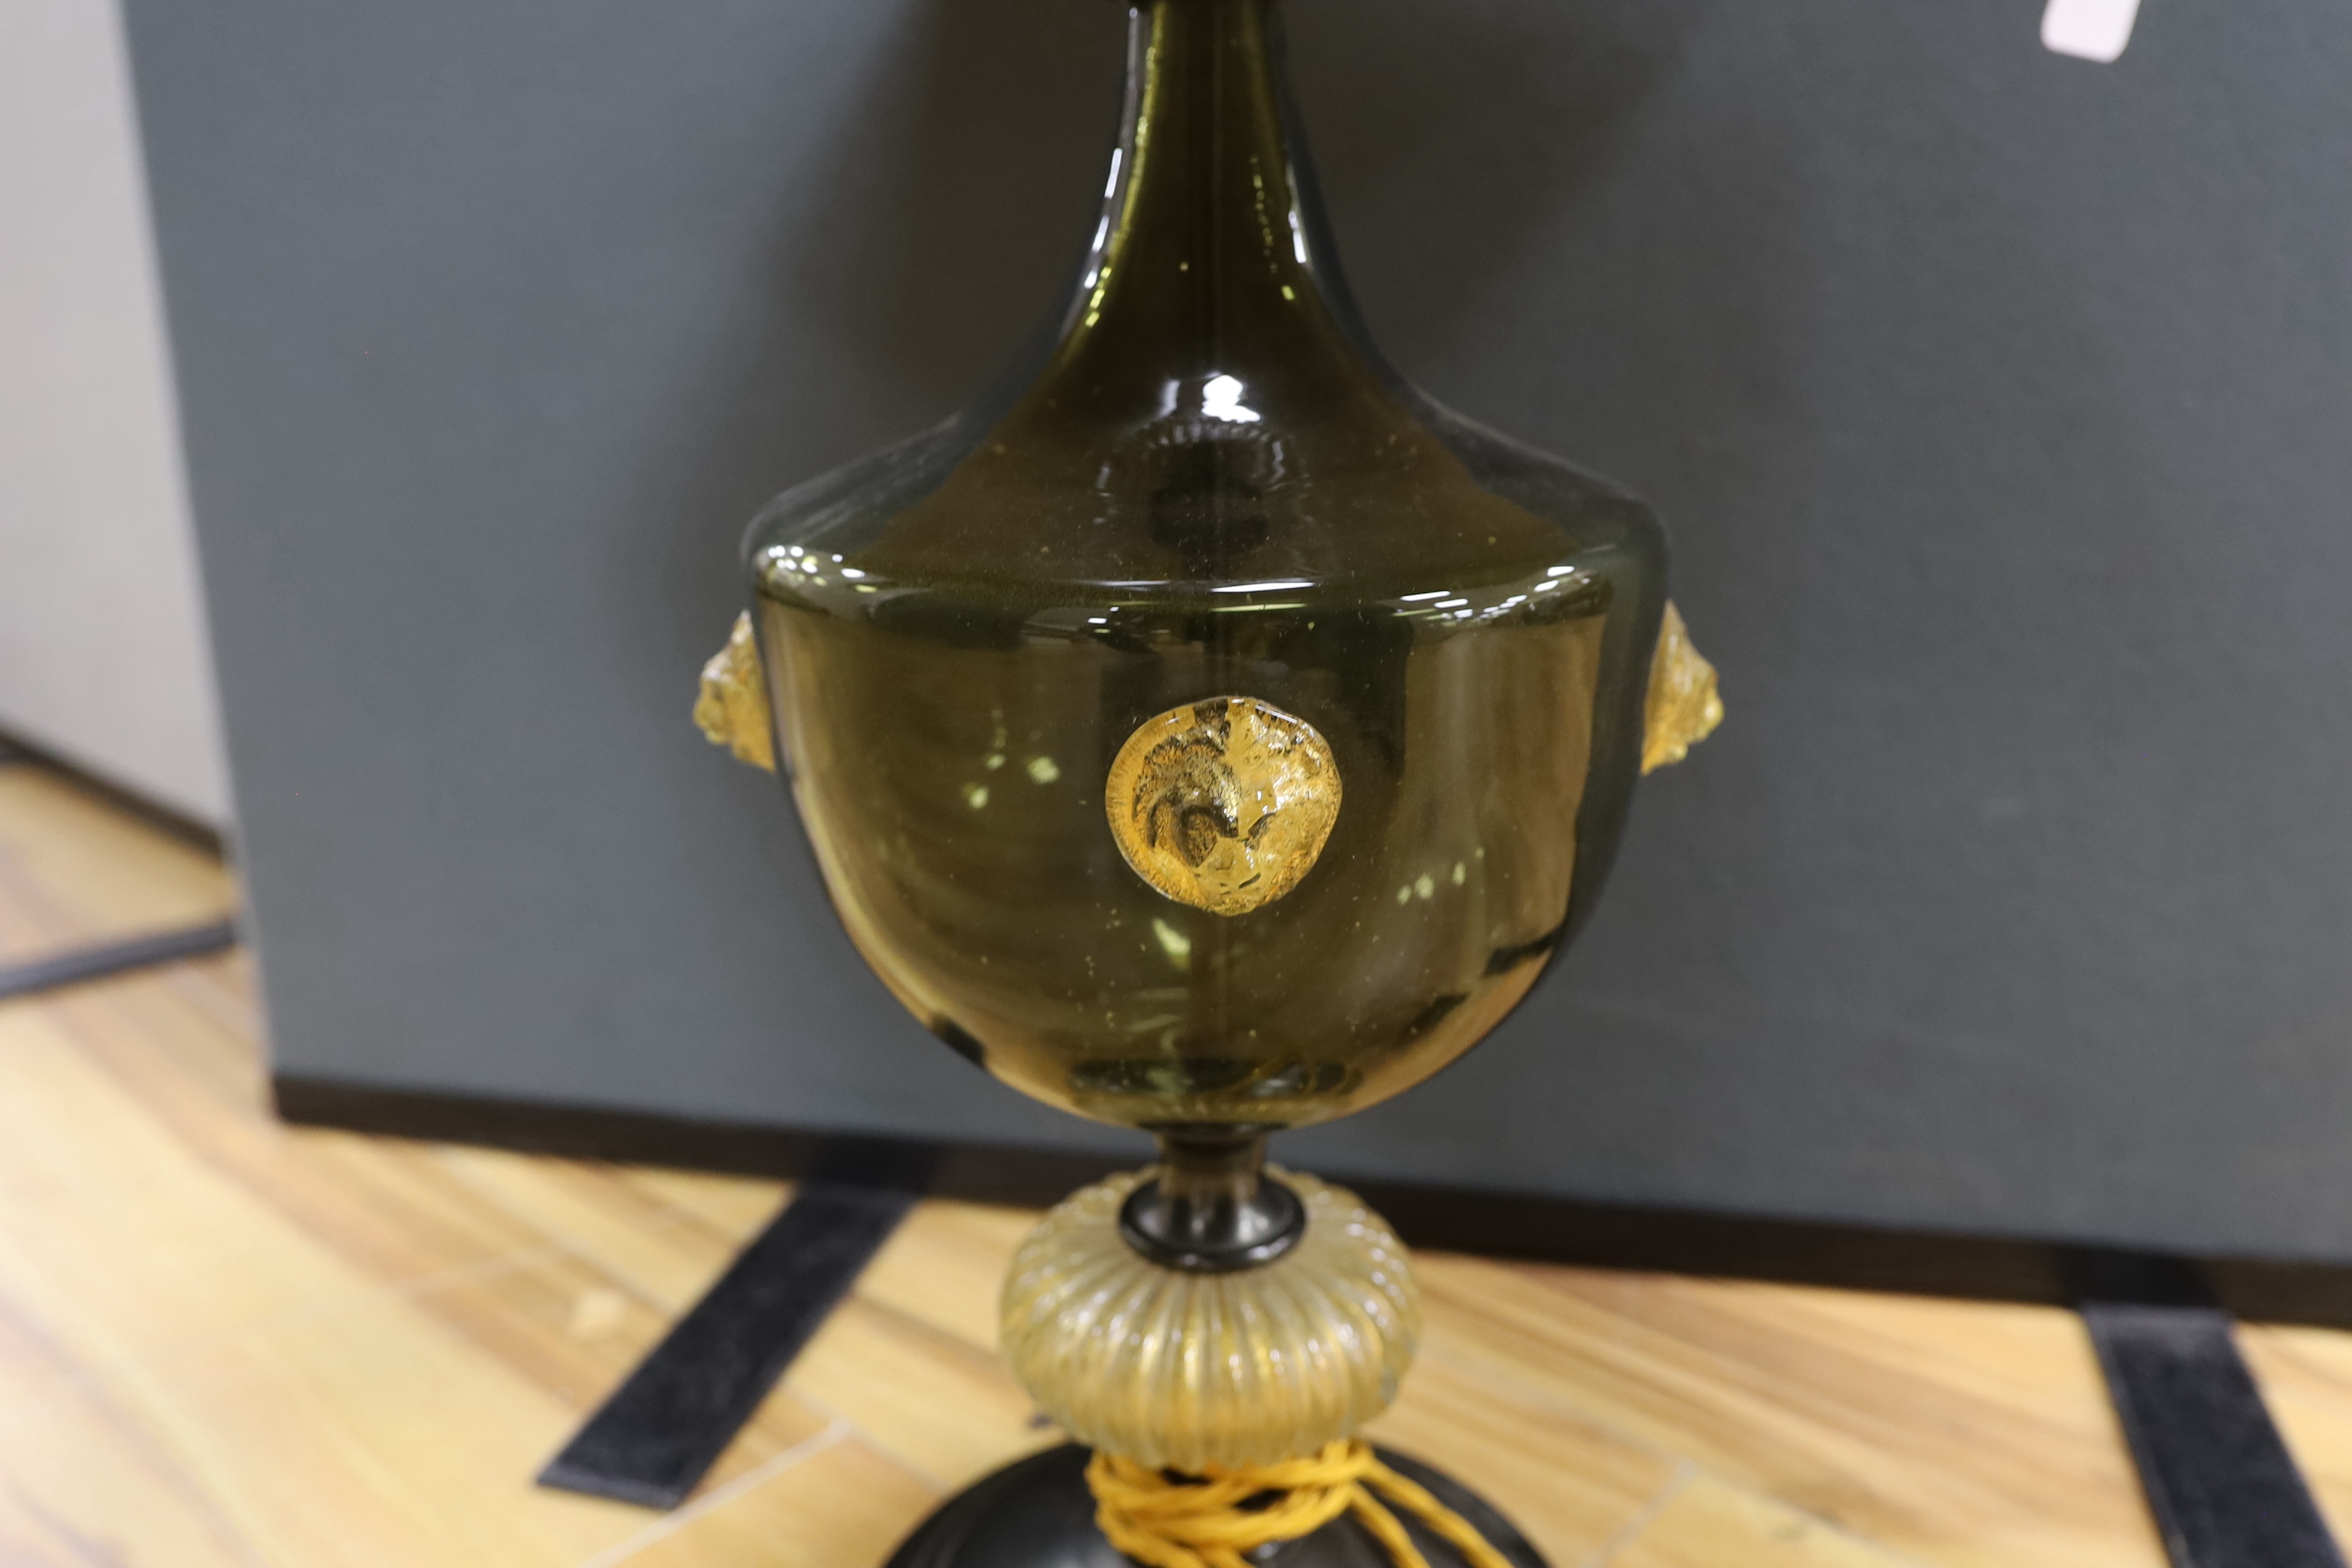 A Murano glass table lamp with shade, 80cm high